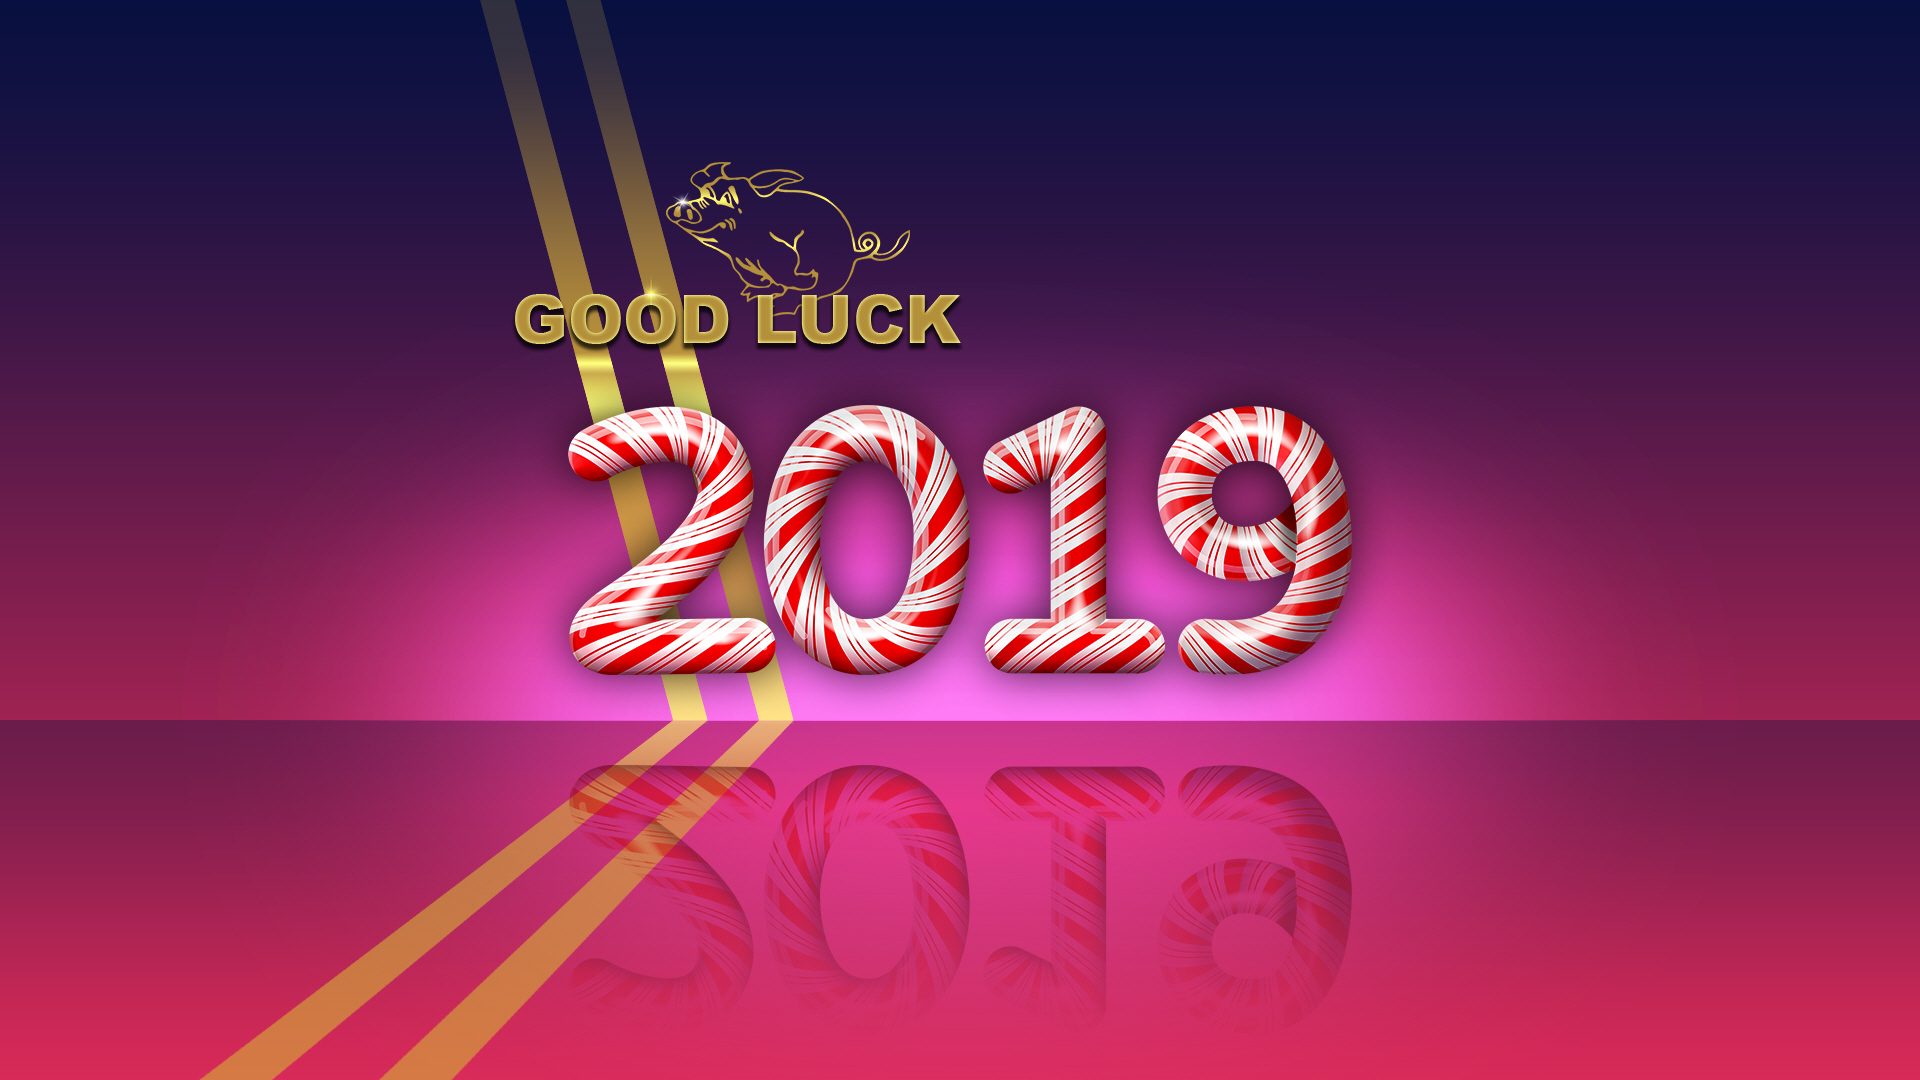 General 1920x1080 good luck 2019 (year) reflection gradient numbers holiday